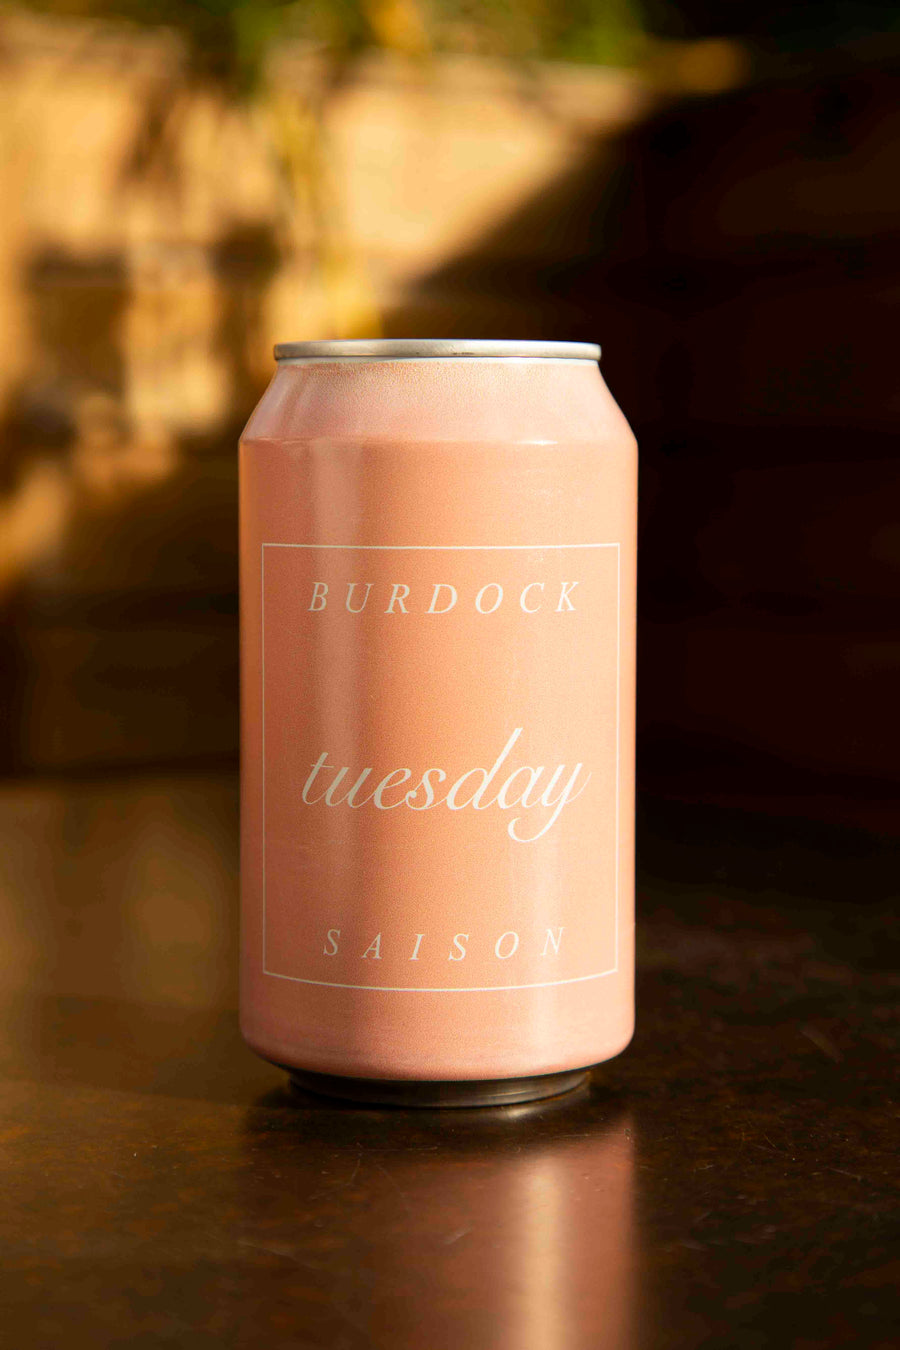 Tuesday 24-Pack (5.3%)